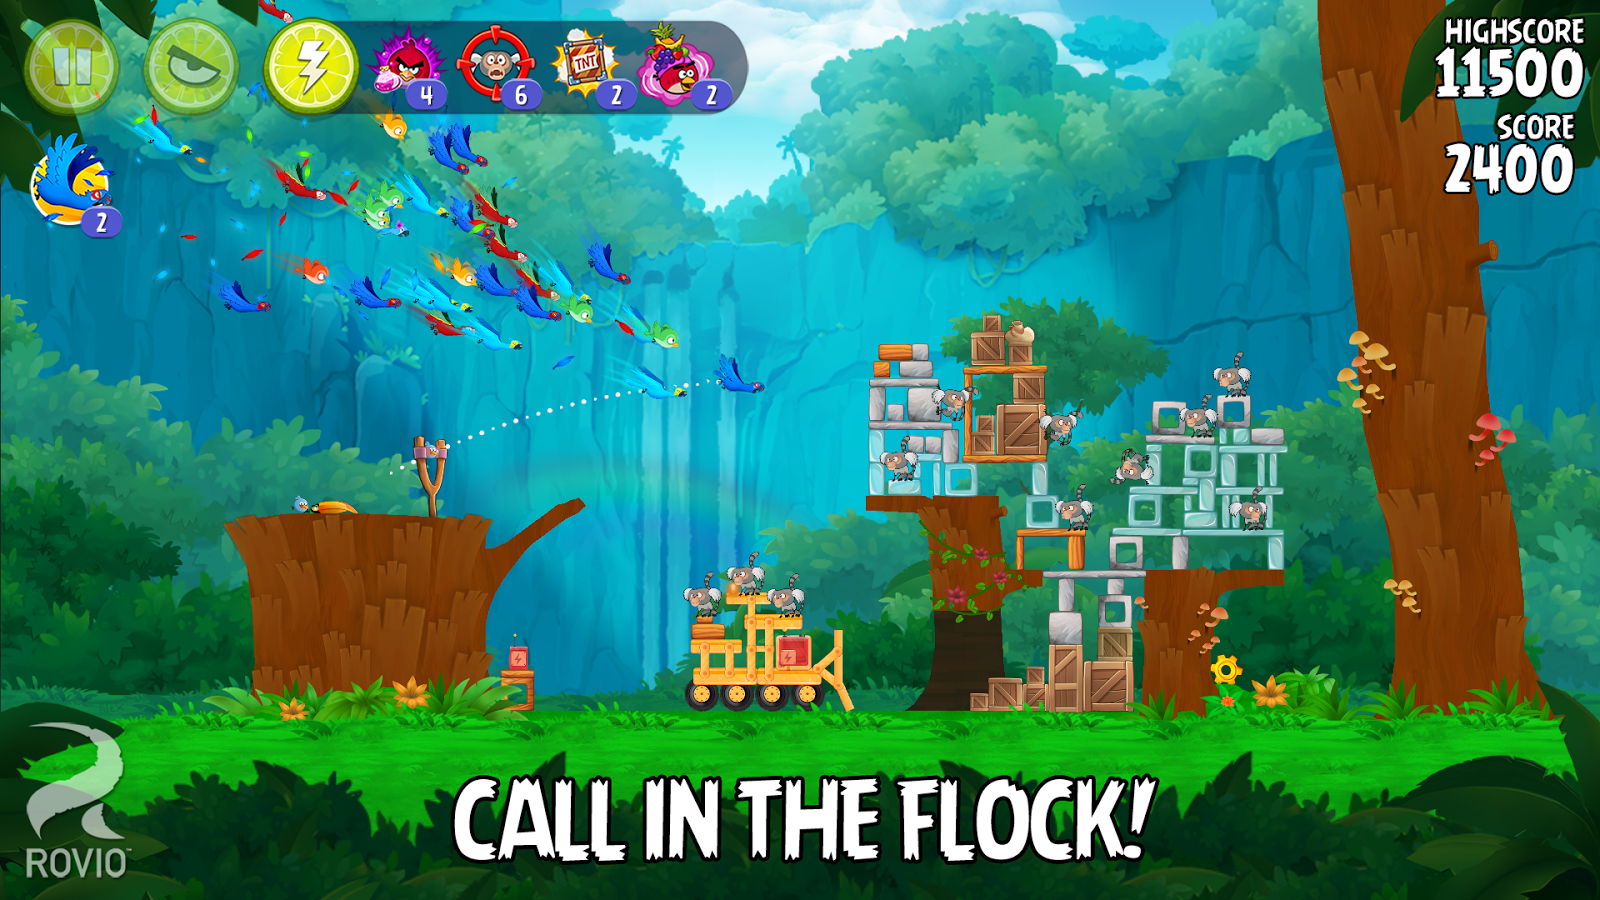 Angry Birds Rio High Quality Background on Wallpapers Vista